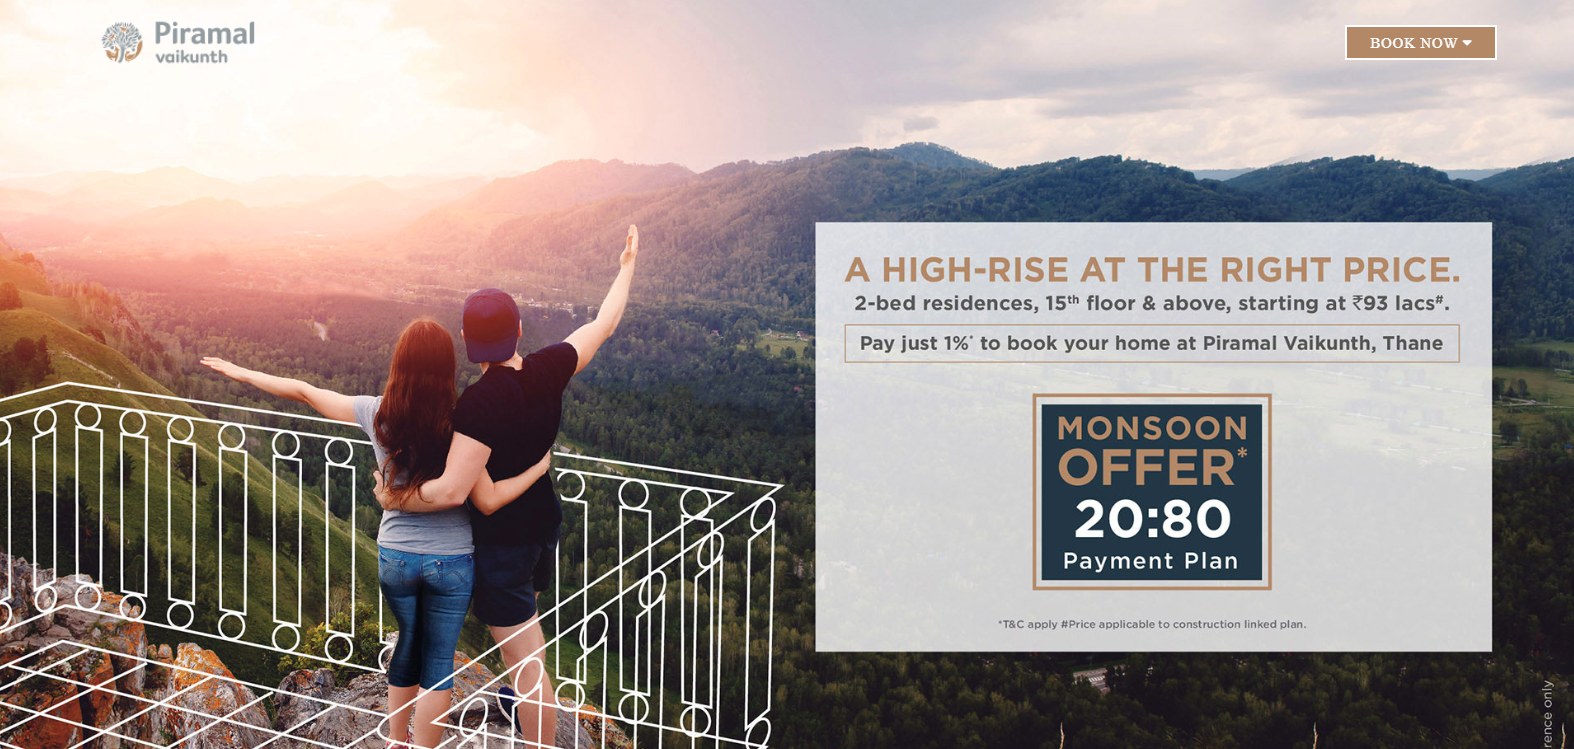 Avail the Monsoon Offer with 20:80 payment plan at Piramal Vaikunth in Mumbai Update